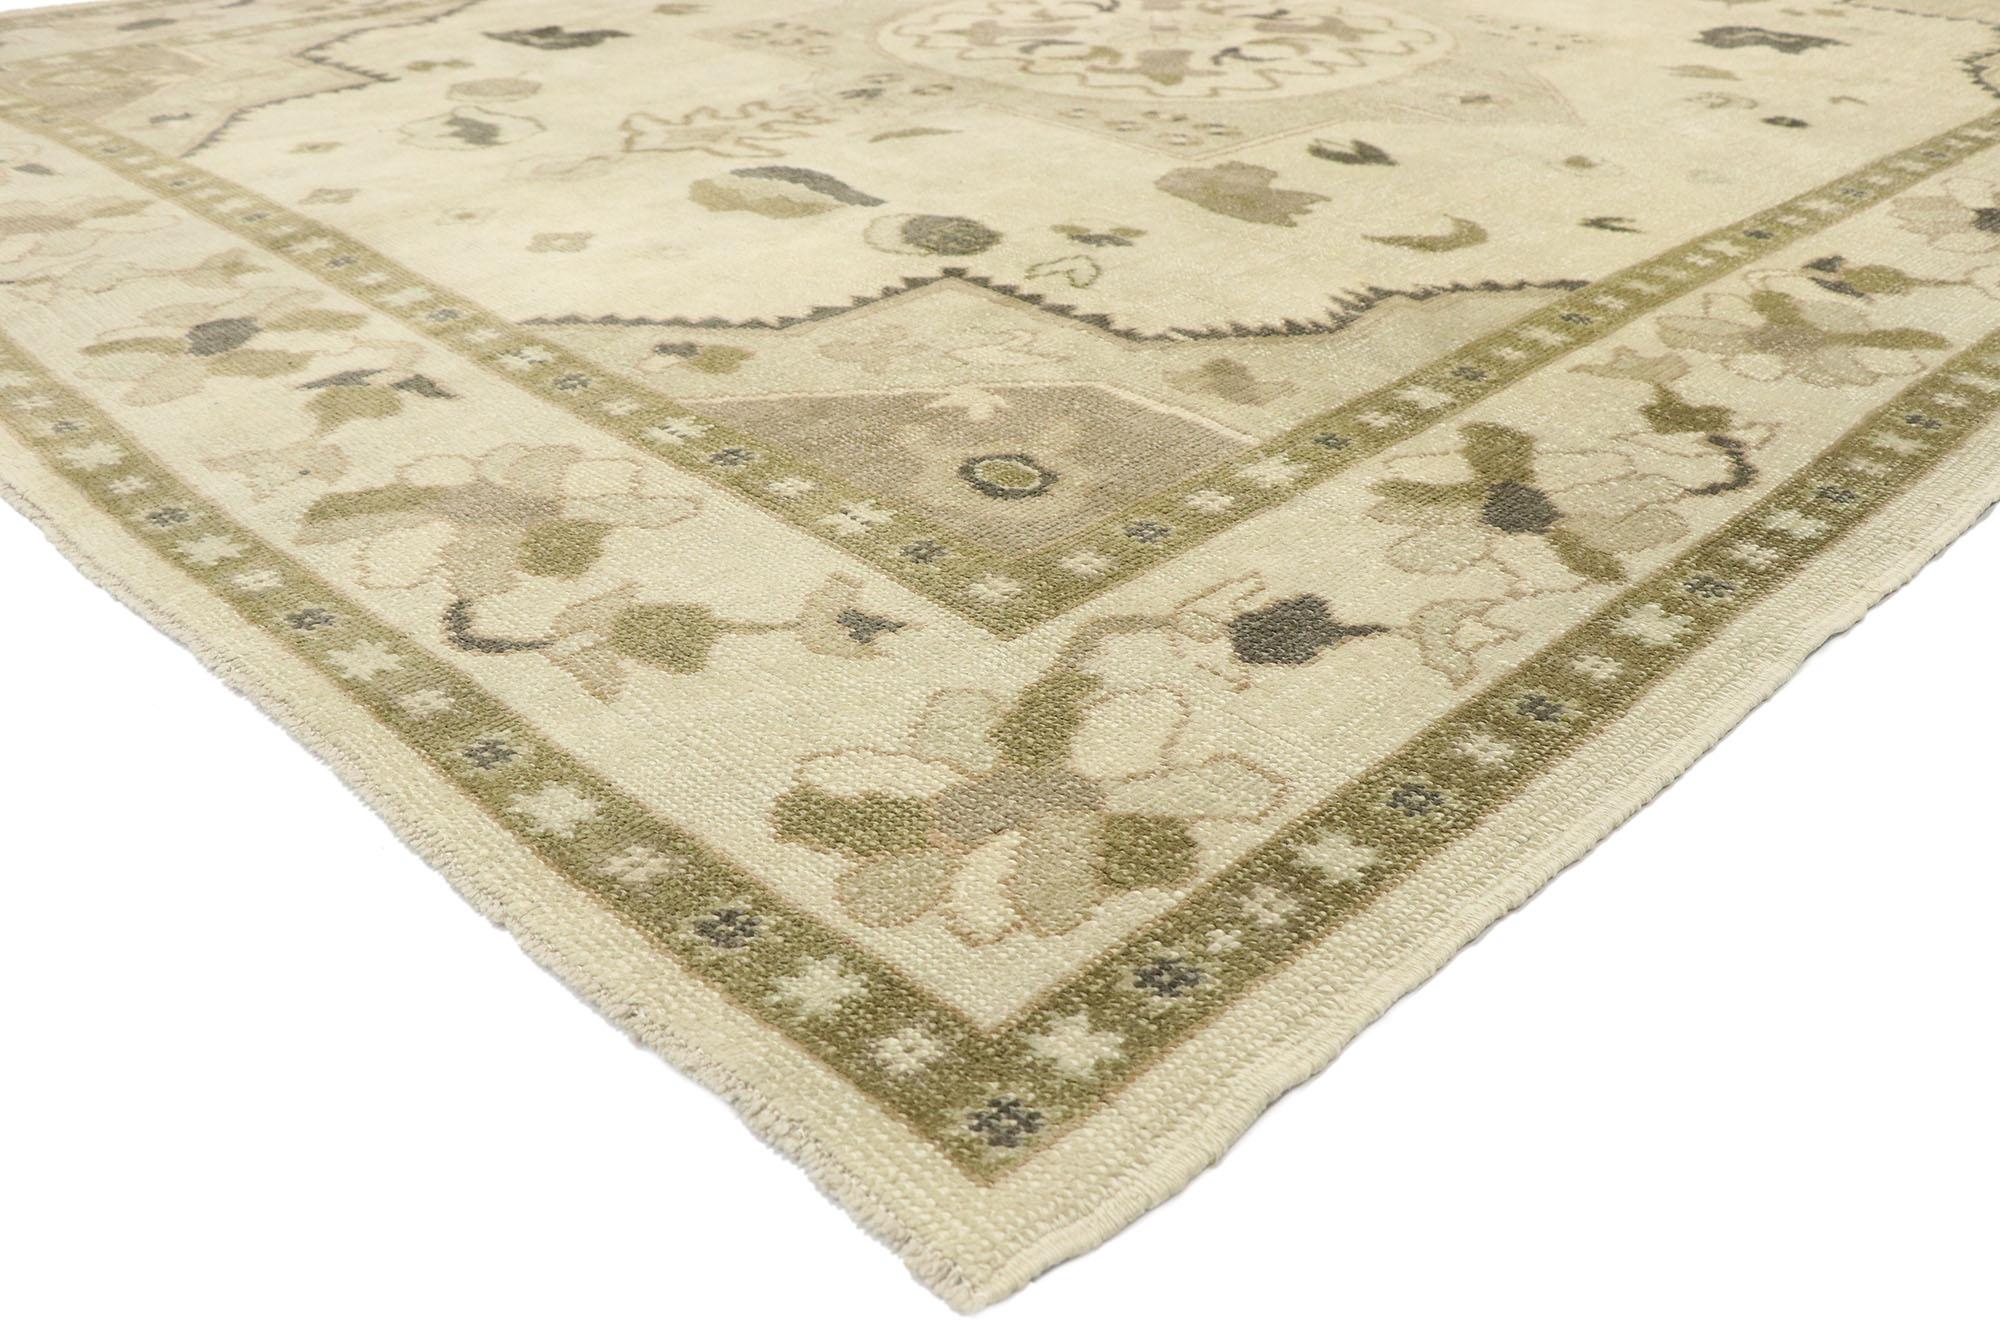 52924 New Contemporary Turkish Oushak Rug with Modern Shaker Style. Emanating sophistication and grace, this hand knotted wool contemporary Turkish Oushak rug provides an elegant and genteel design aesthetic with warm neutral hues. Taking center